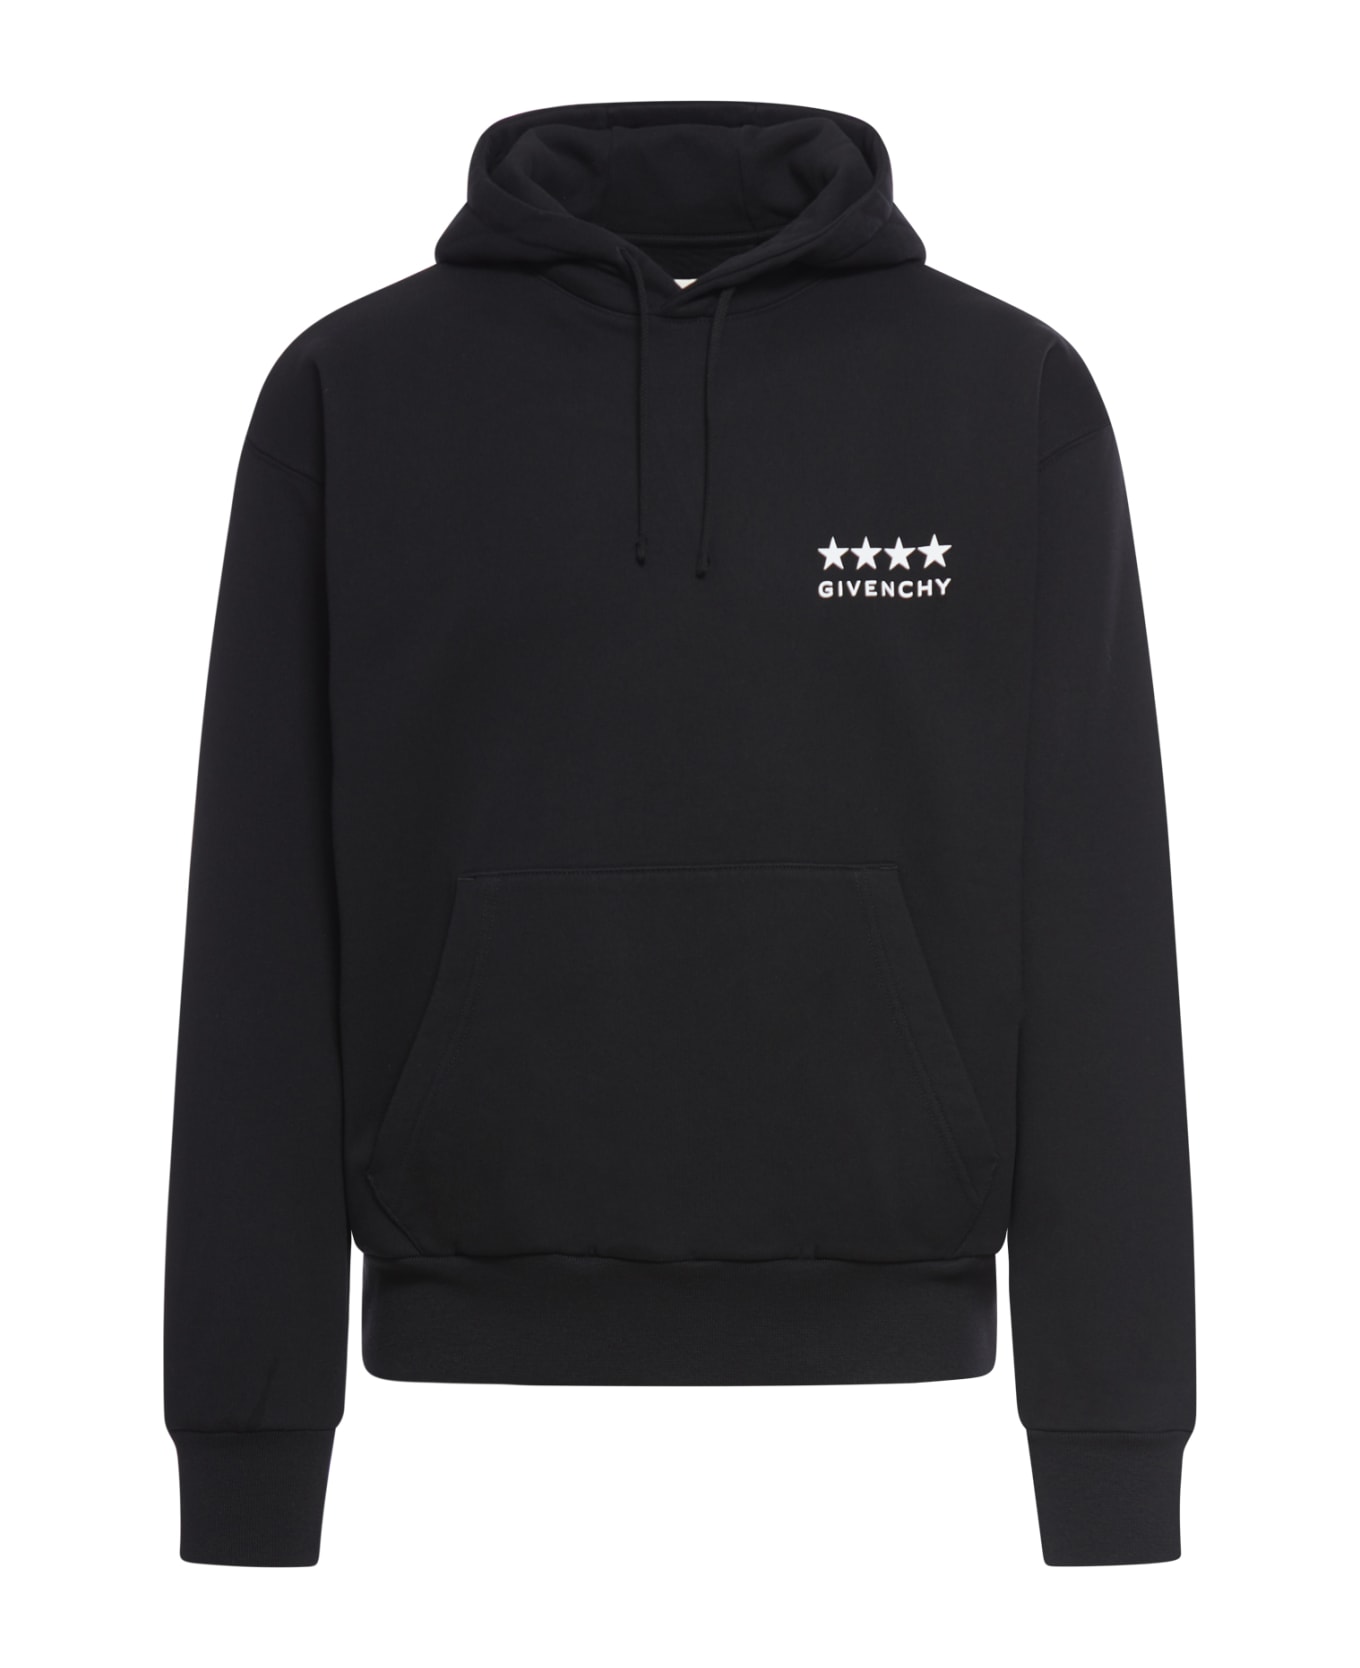 Givenchy Boxy Fit Hoodie With Pocket Base - Black